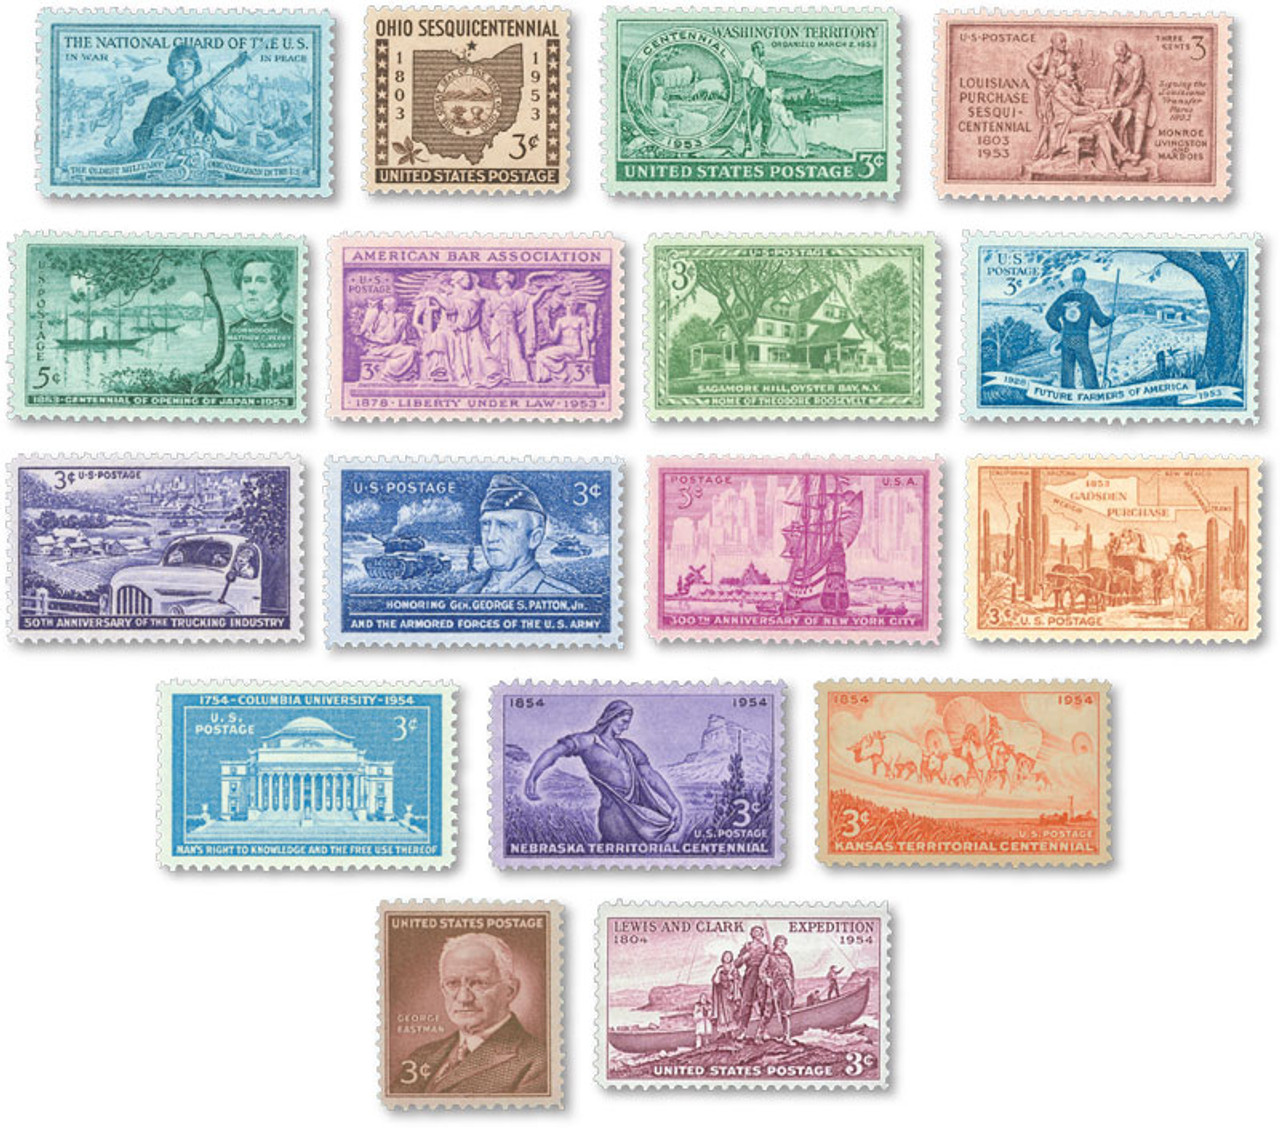 Product of the Month – Stamp Showcase